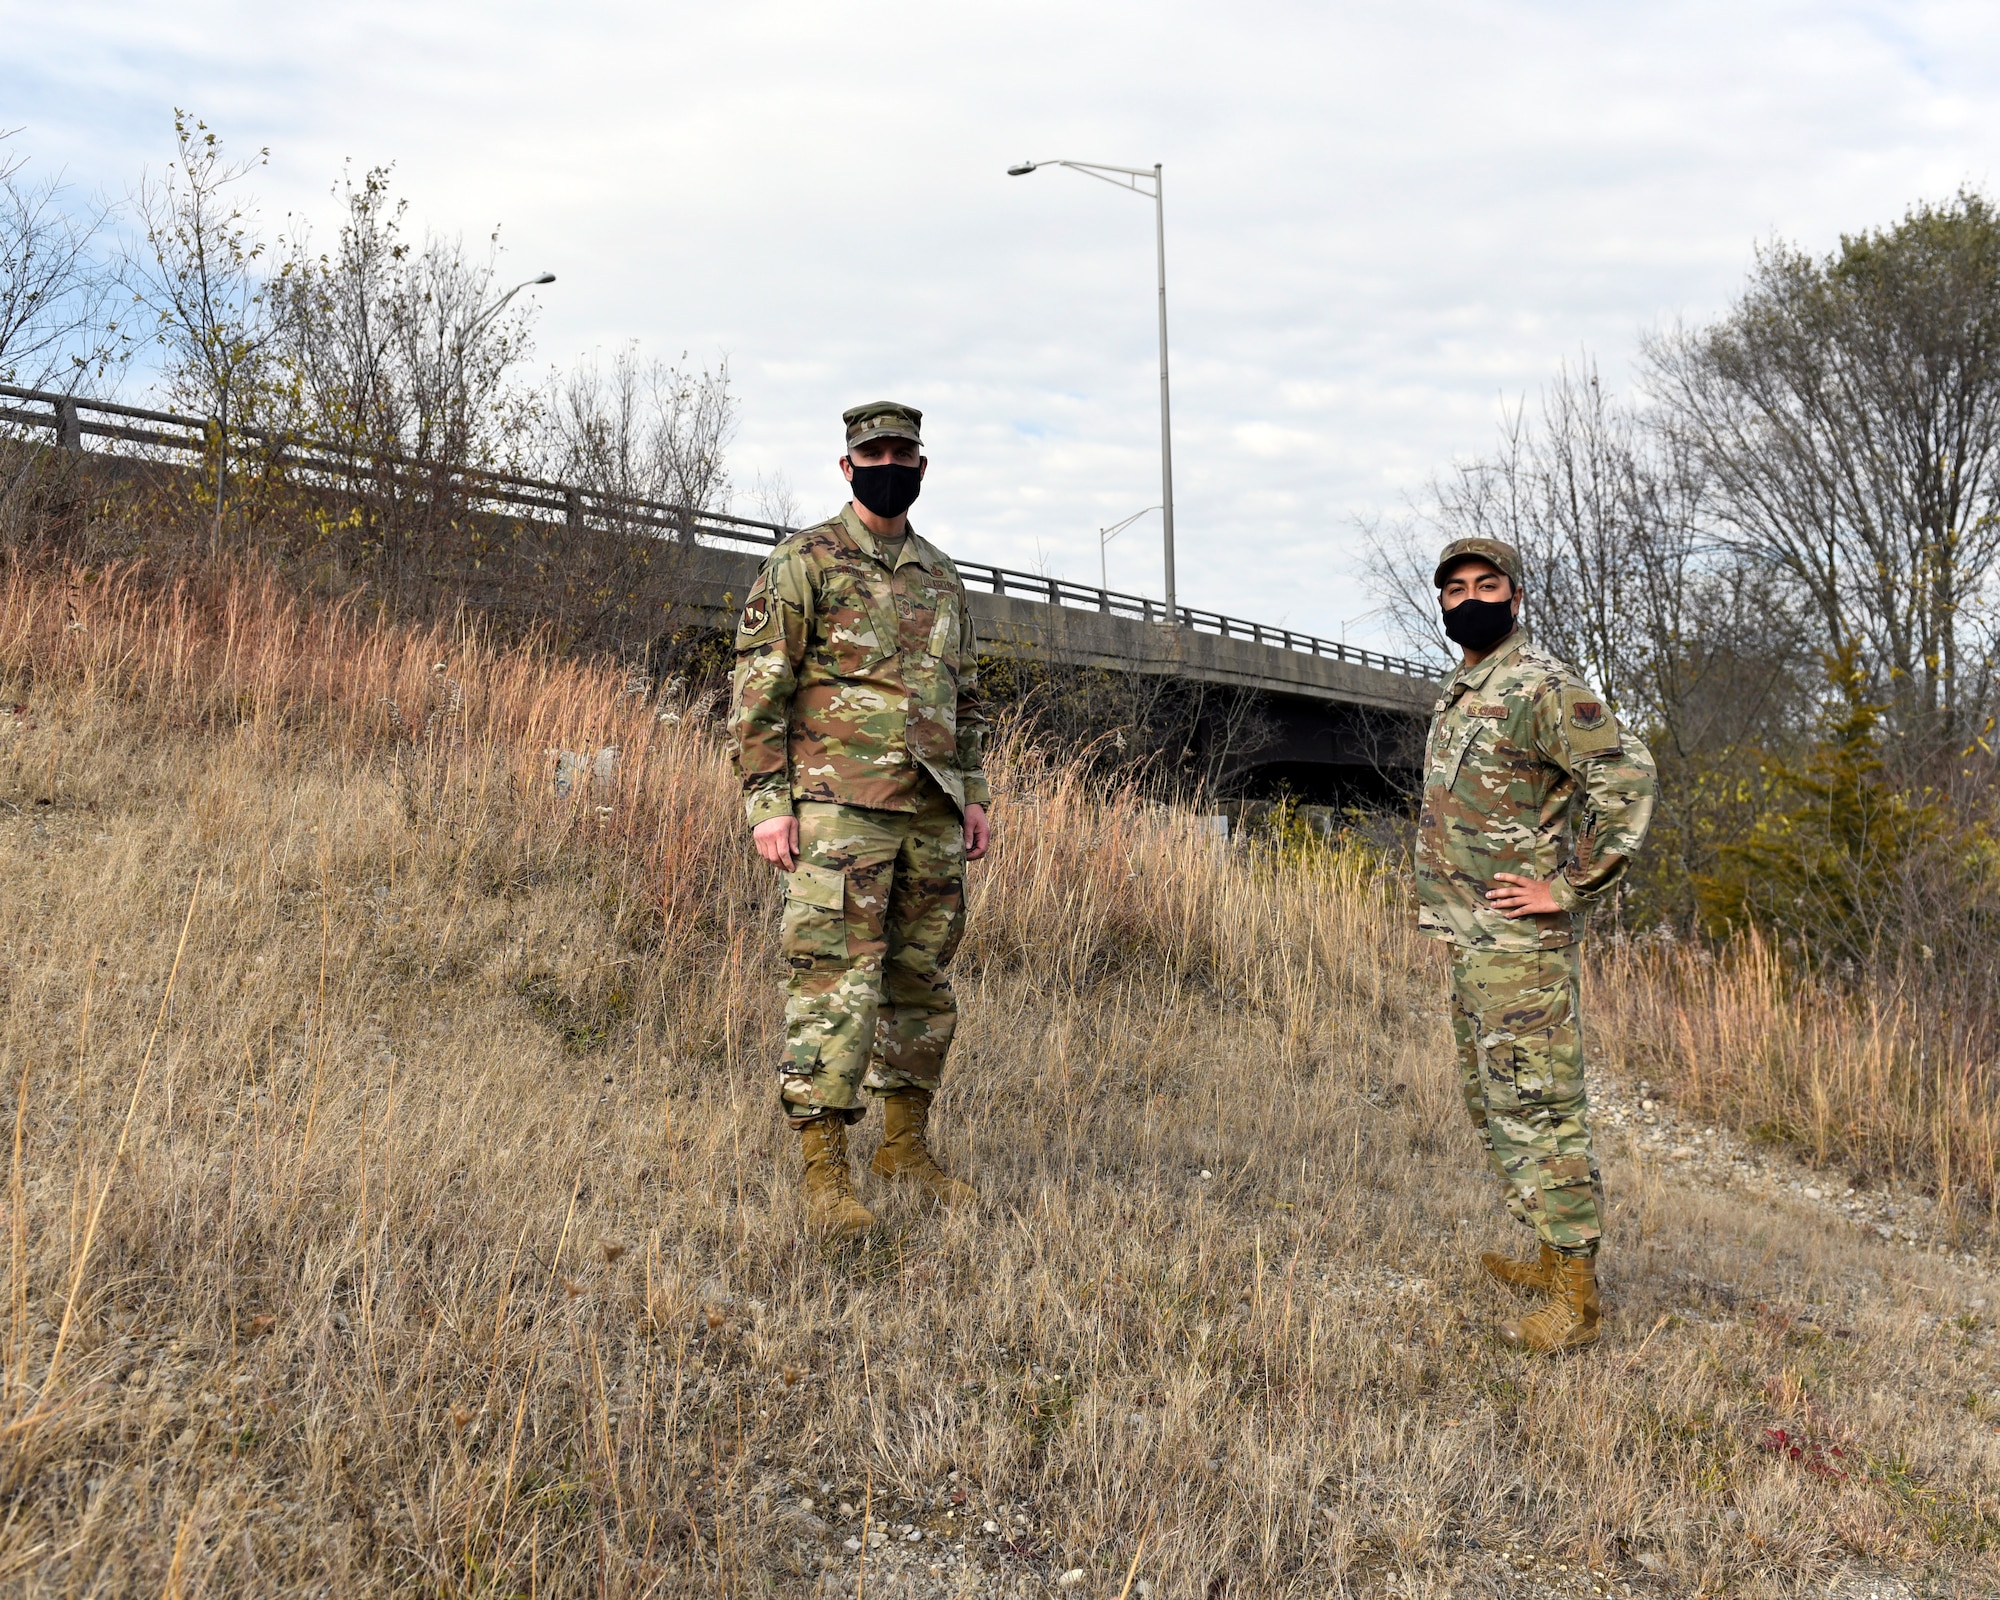 U.S. Air Force Senior Master Sgt. David Briden, left, Air Force Installation Contracting Center expeditionary operations manager, and Tech. Sgt. Anthony Staton, National Air and Space Intelligence Center, stand on the South Maple Avenue bridge in Fairborn, Ohio, on Nov. 20, 2020. Two days earlier, the Airmen assigned to Wright-Patterson Air Force Base stopped to aid a teen who was hanging over the side of the bridge and appeared to be in distress. They stayed with the teen until police and medics arrived. A portion of the photo has been altered for security reasons. (U.S. Air Force photo by Ty Greenlees)